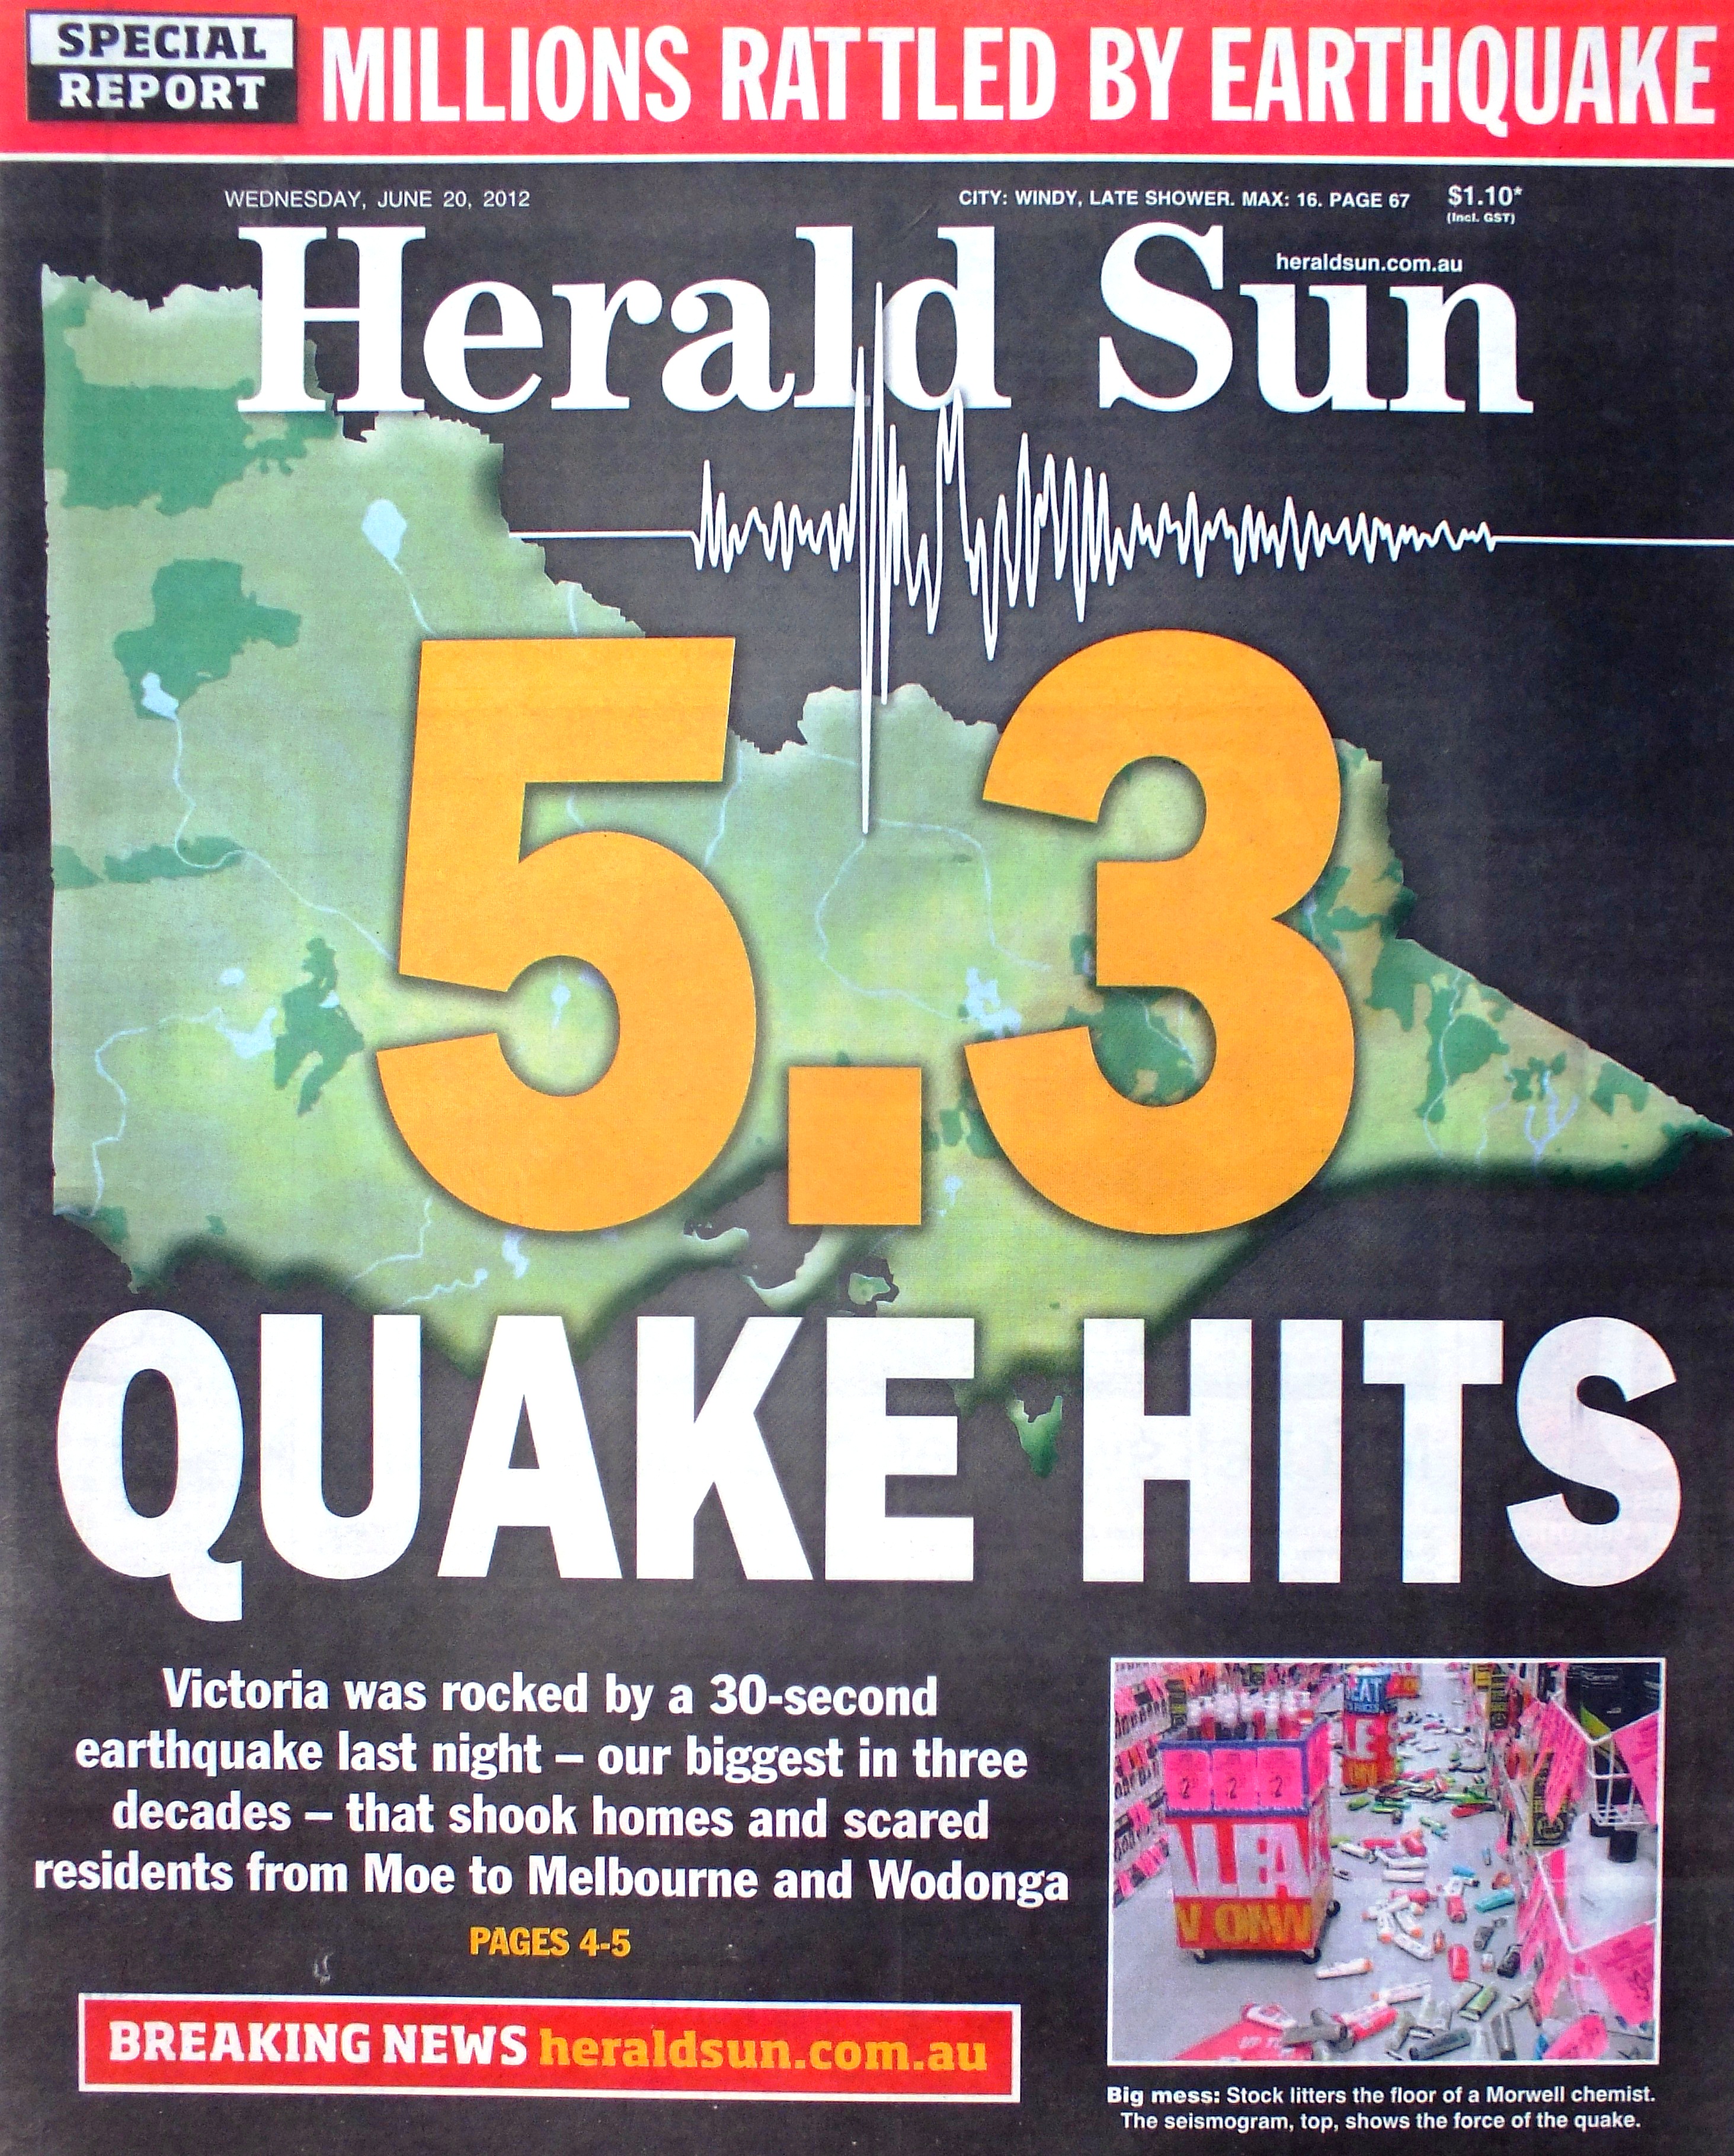 The Herald Sun newspaper front page of the breaking news on the following morning after the earthquake (20 June 2012)